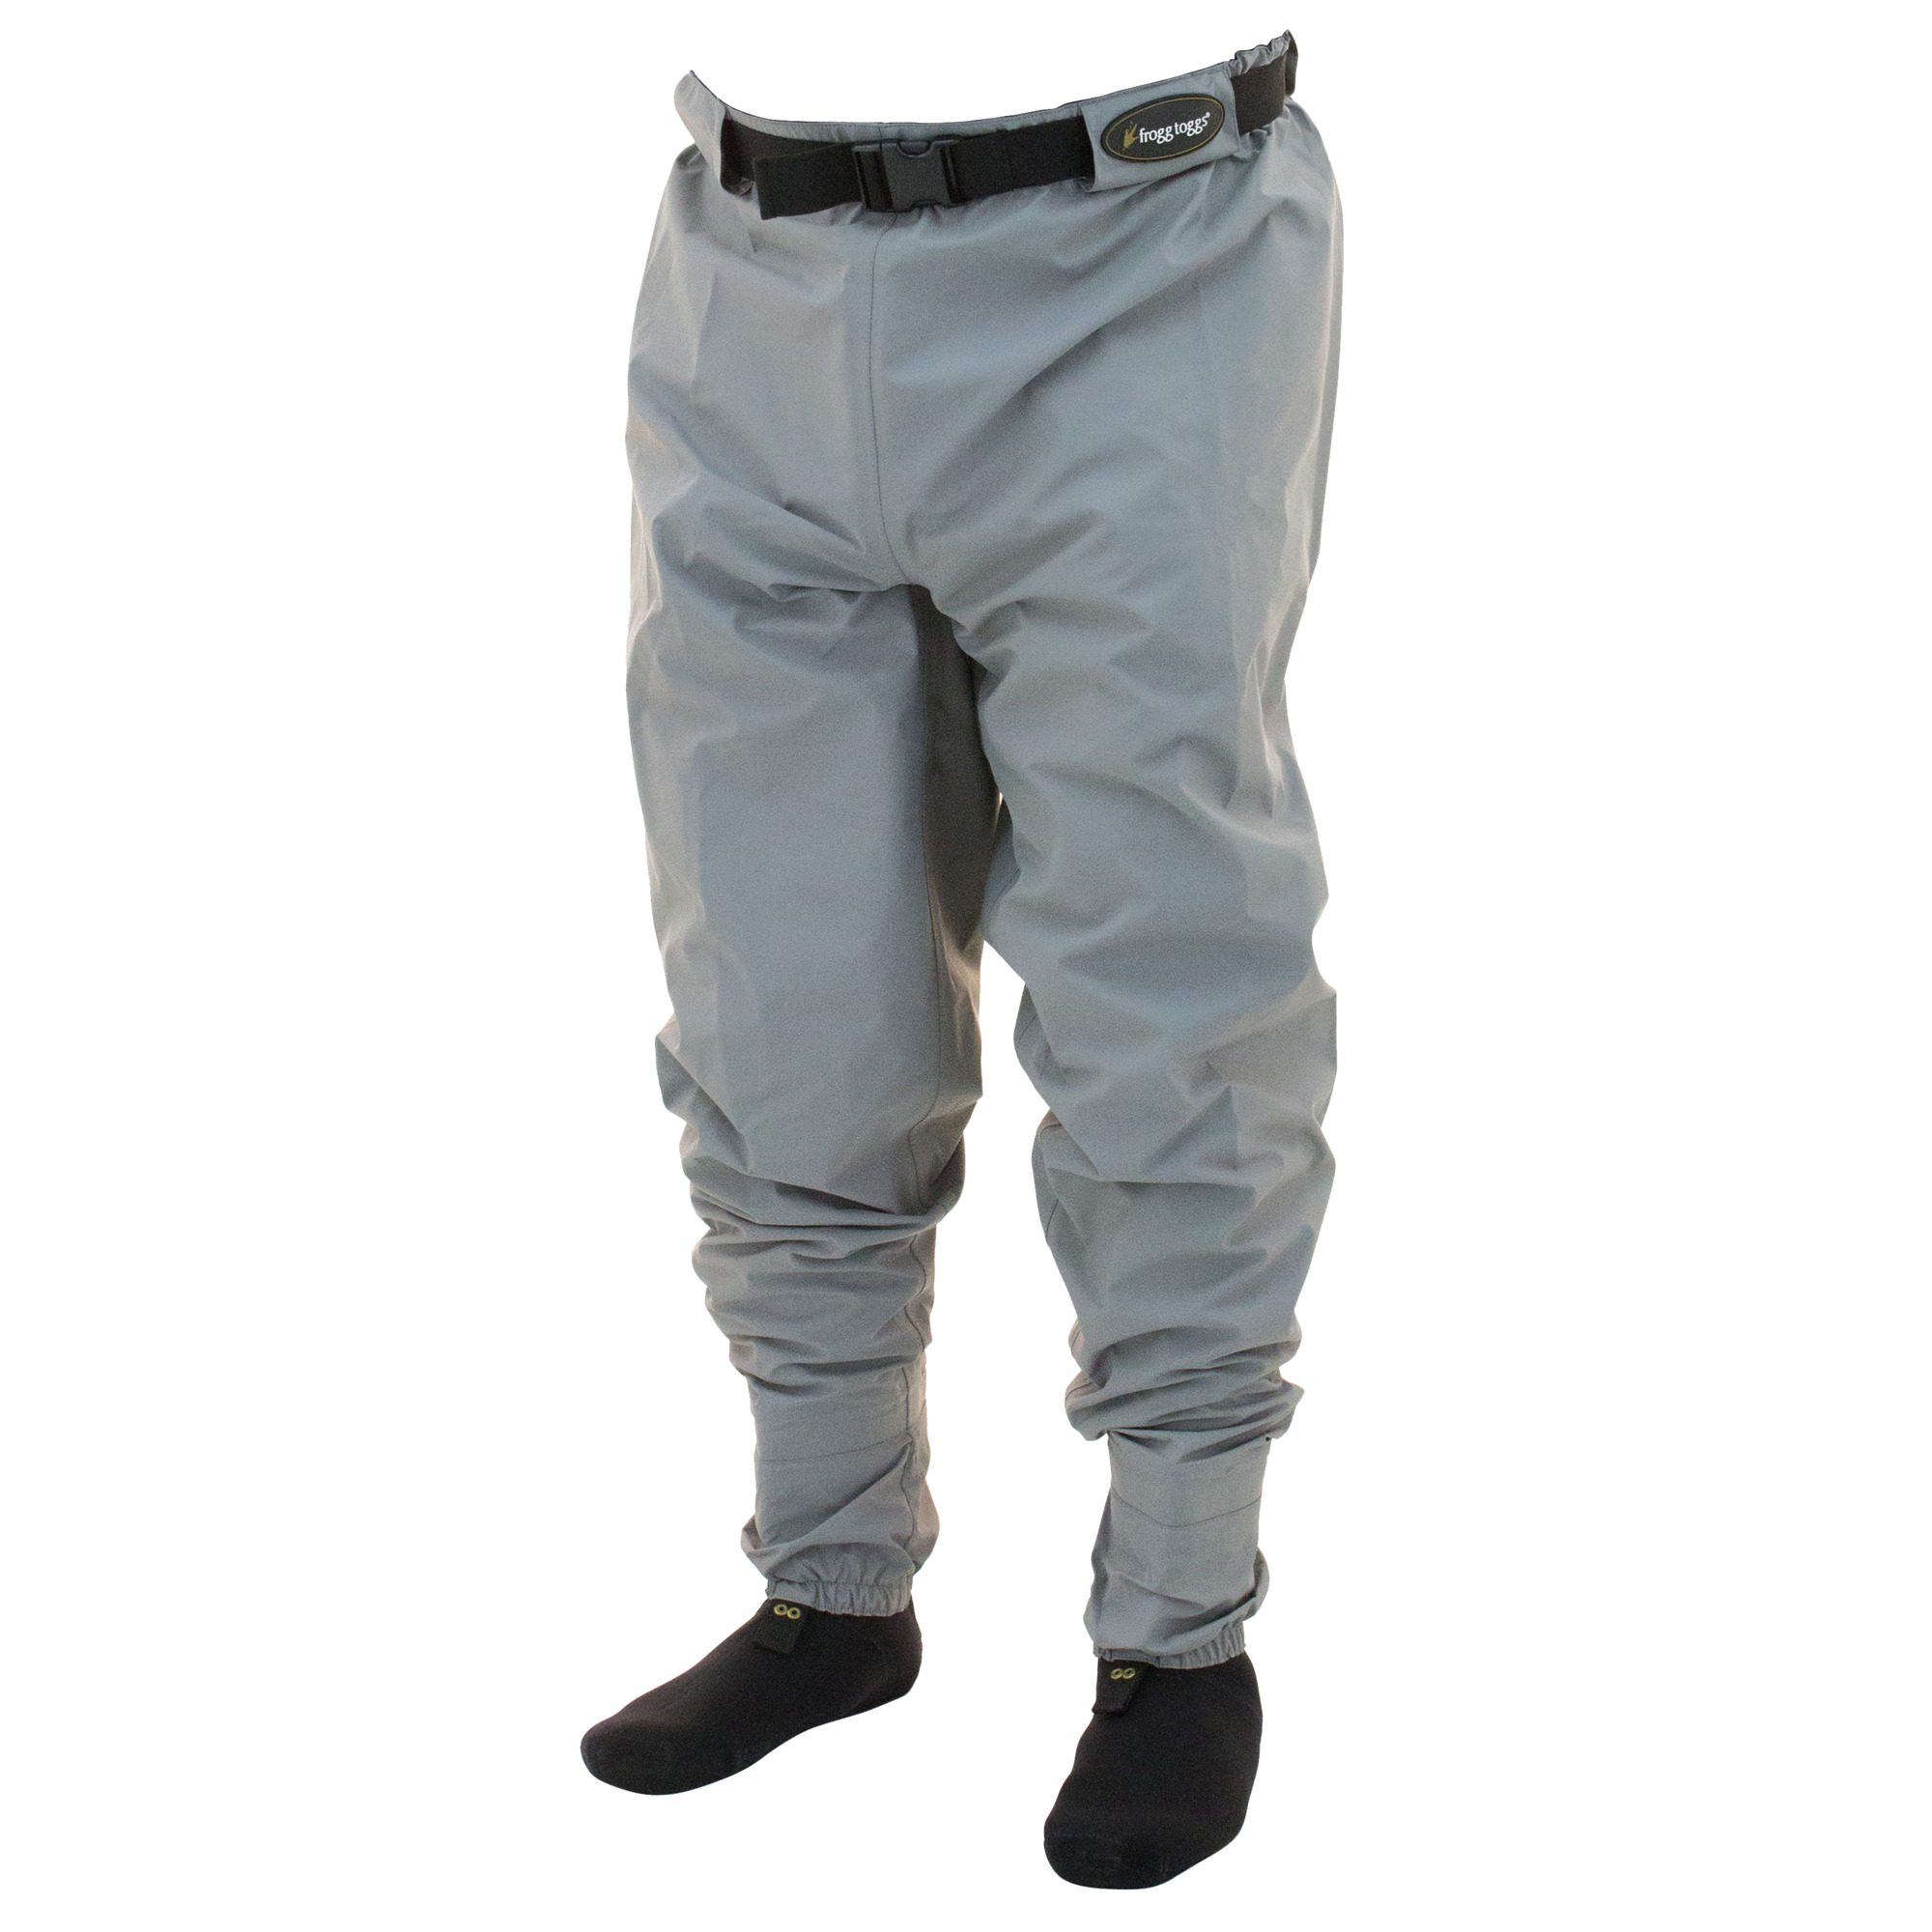 Frogg Toggs Hellbender Stockingfoot Breathable Guide Pant - Small